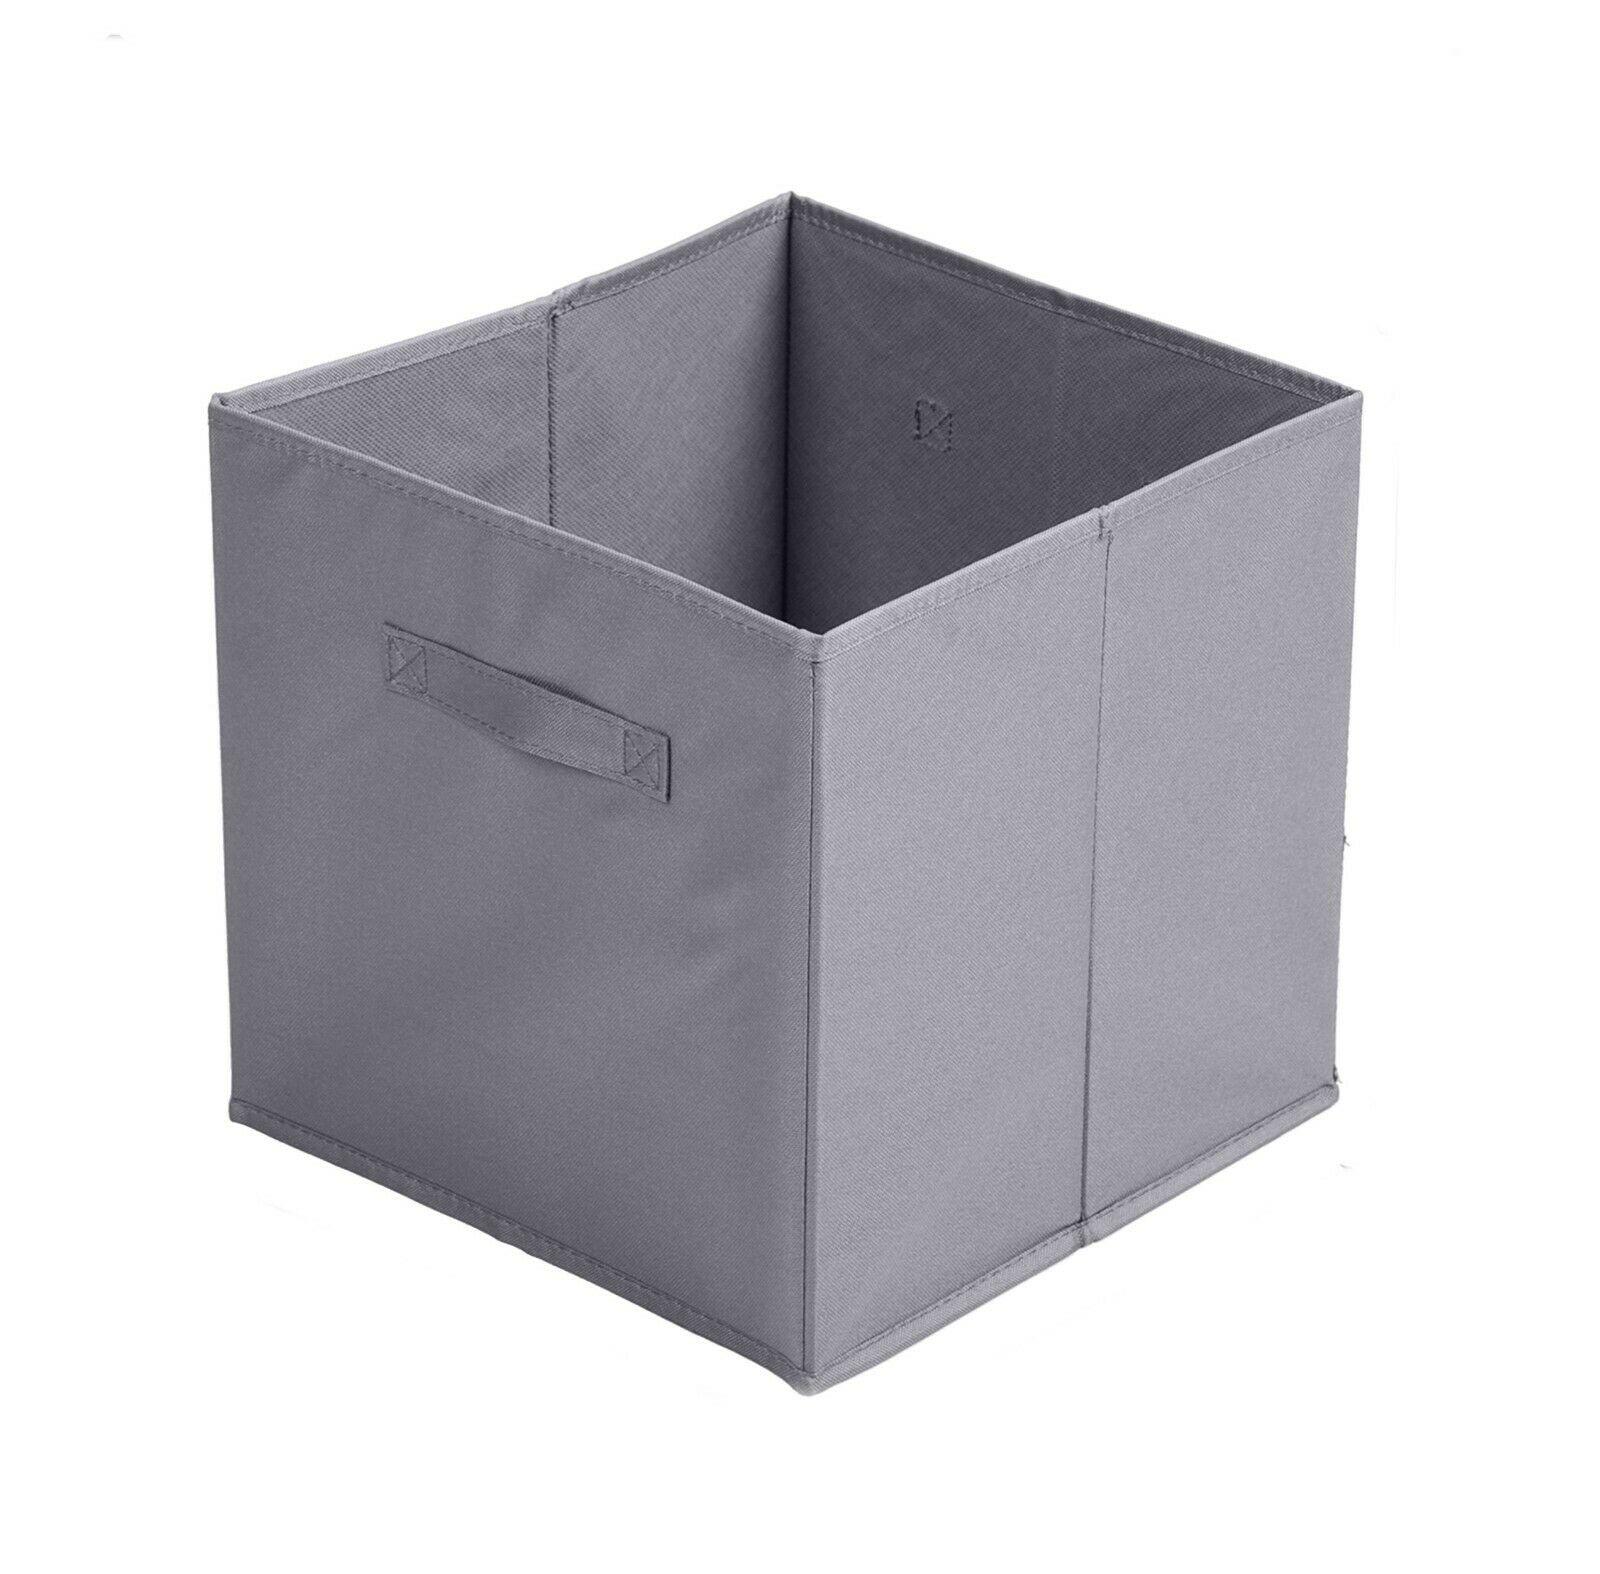 Foldable Storage Boxes Cubes Collapsible Large Folding Organiser ...